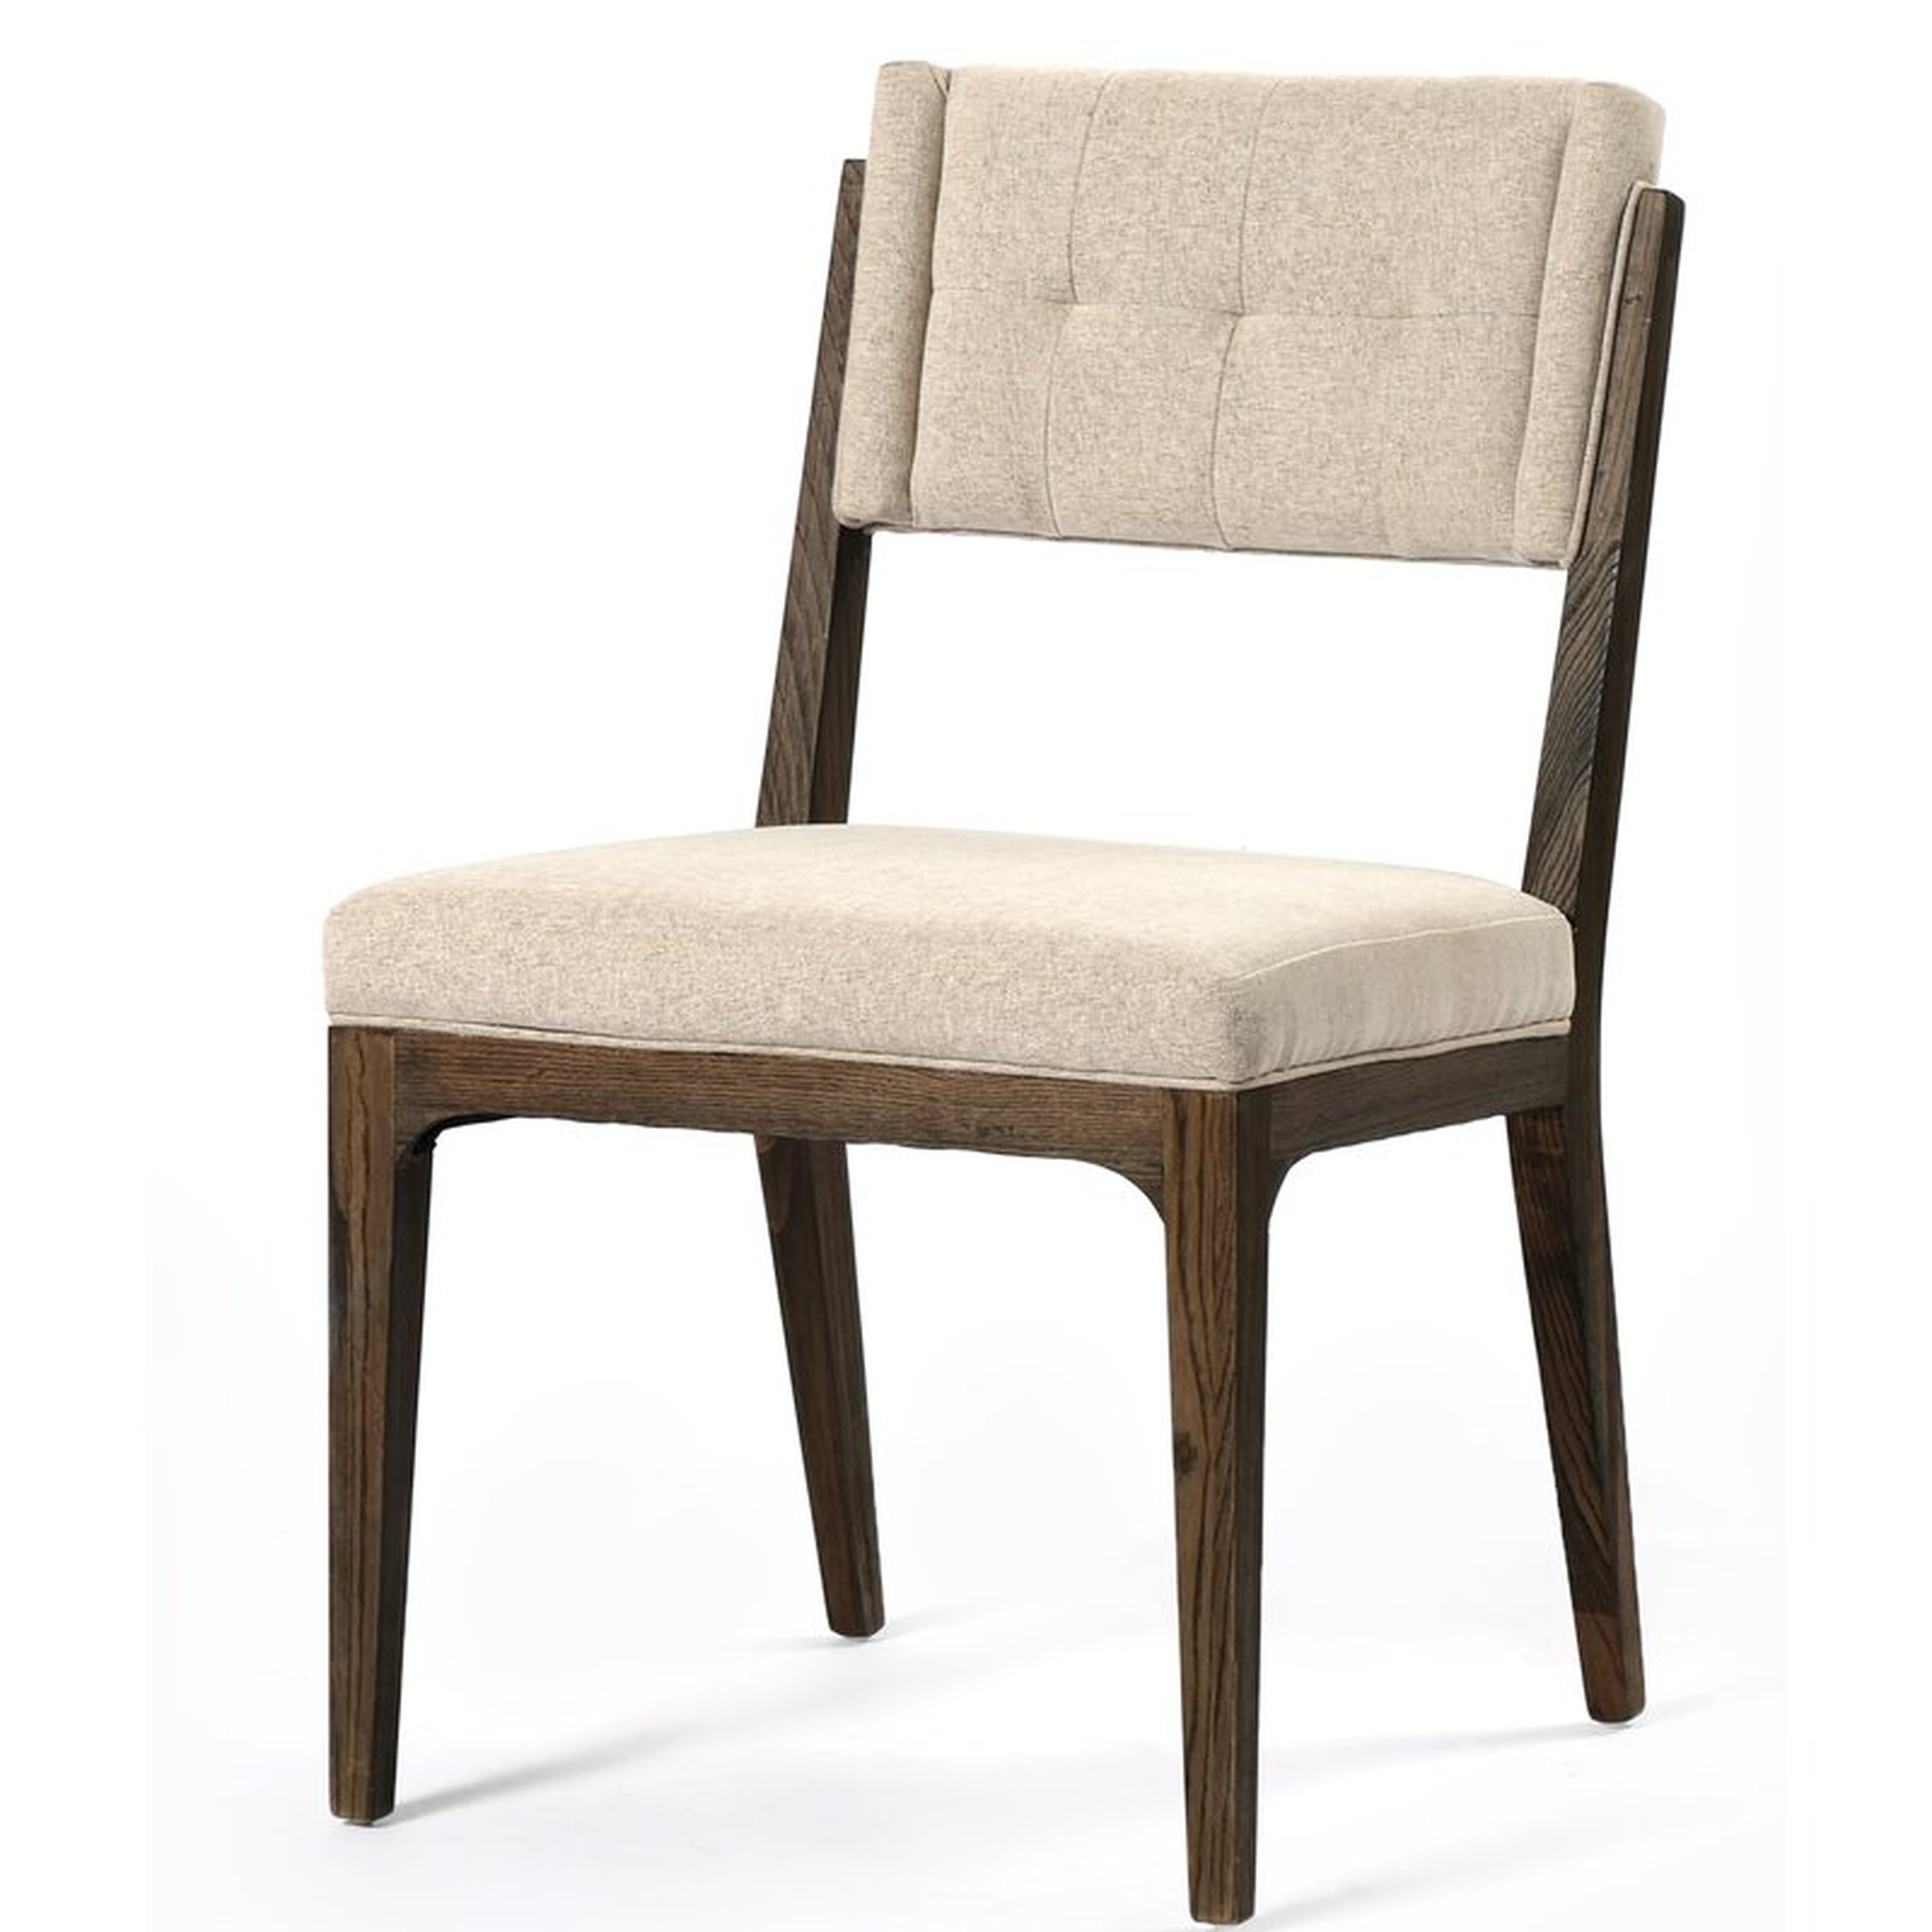 Four Hands Tufted Side Chair in Ivory - Perigold